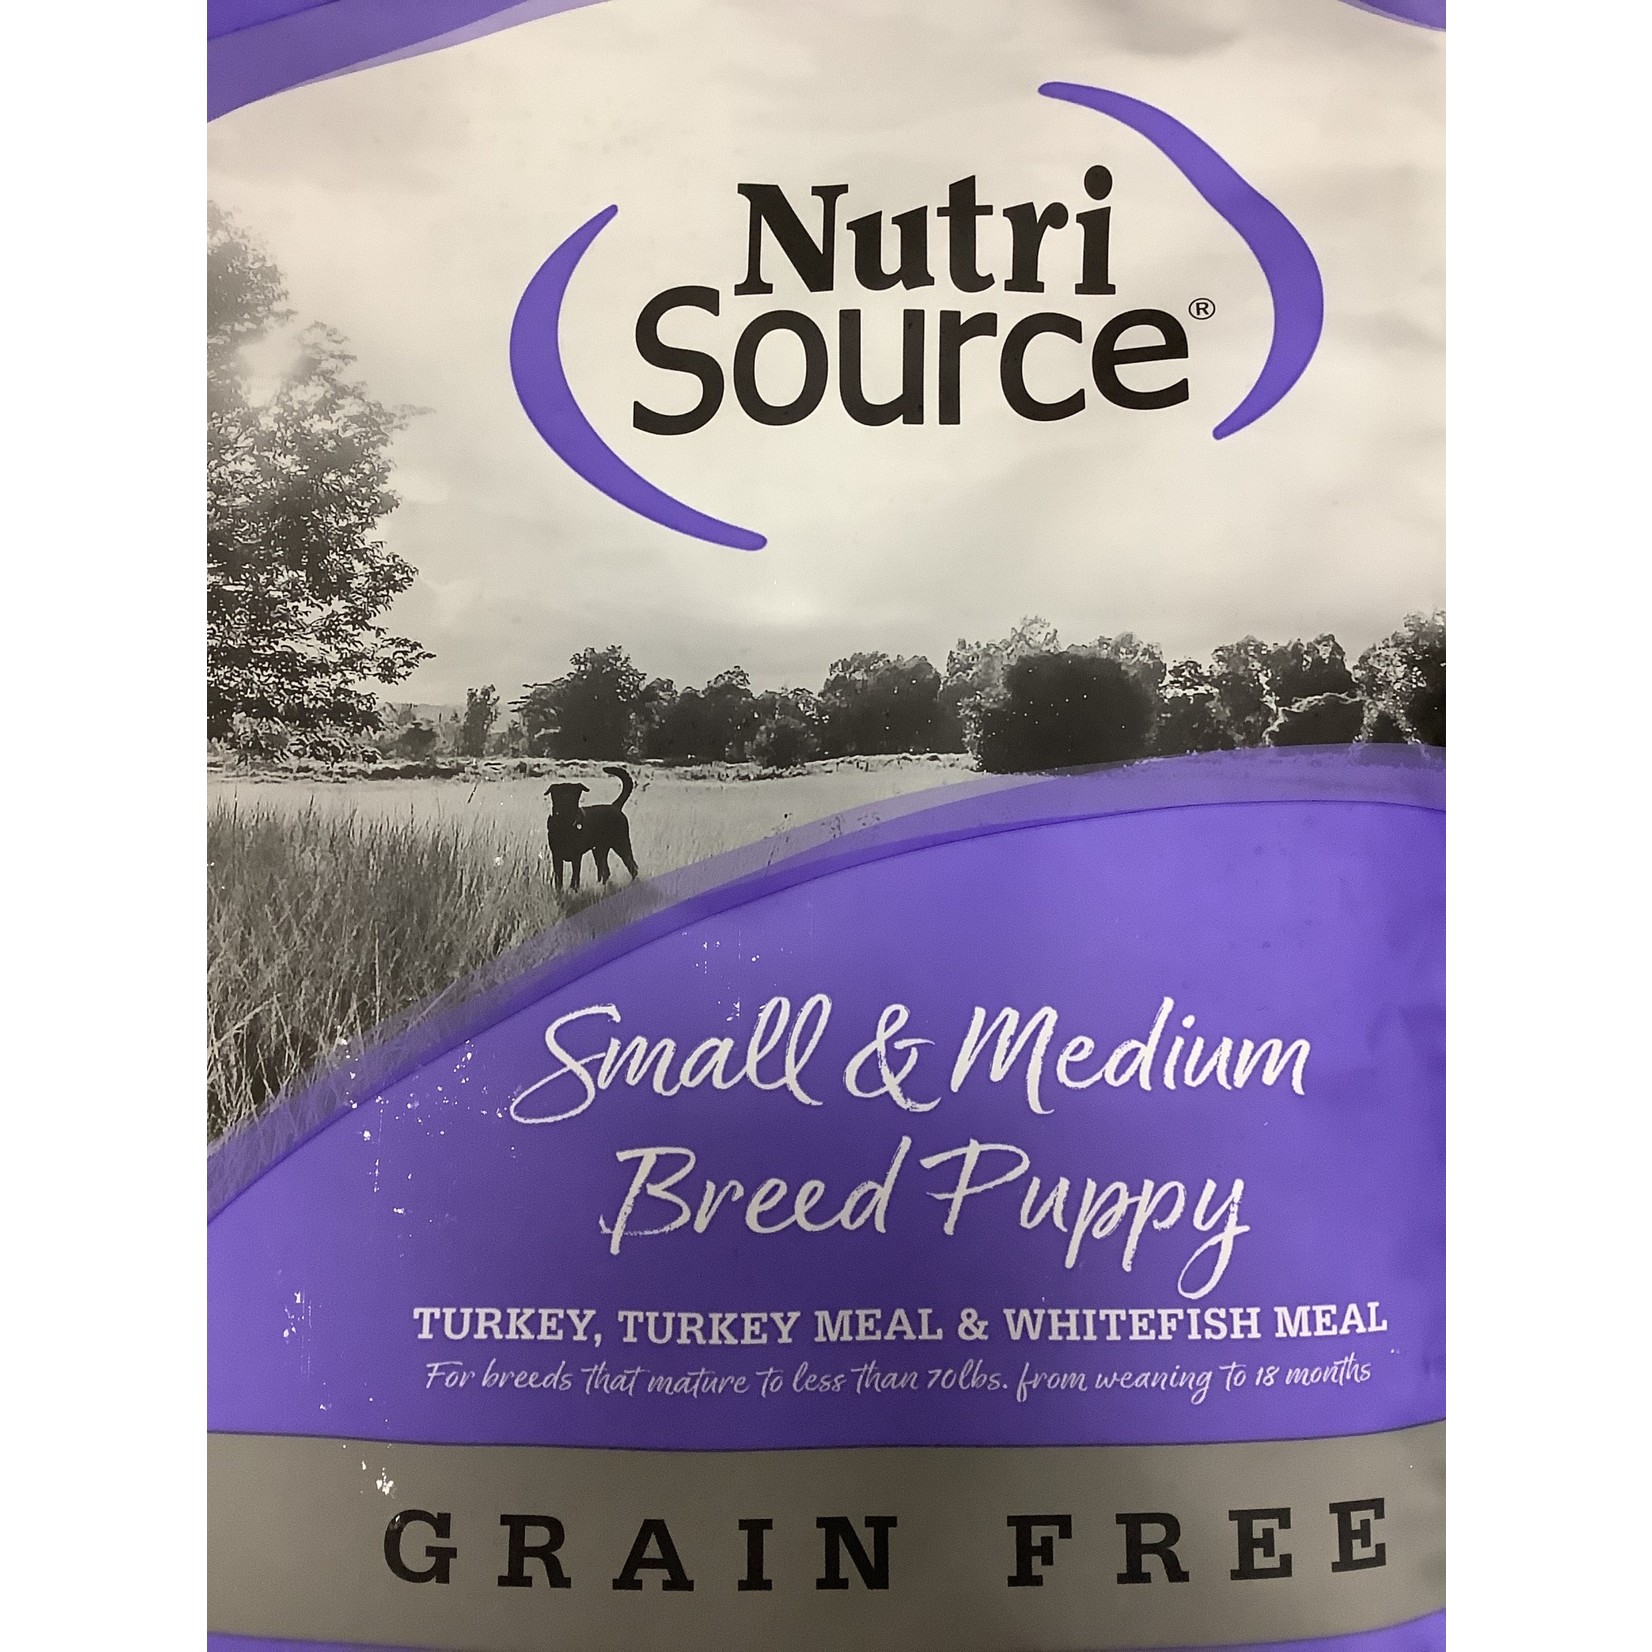 NUTRI SOURCE NUTRISOURCE. Grain-Free Large Breed Puppy 30LB